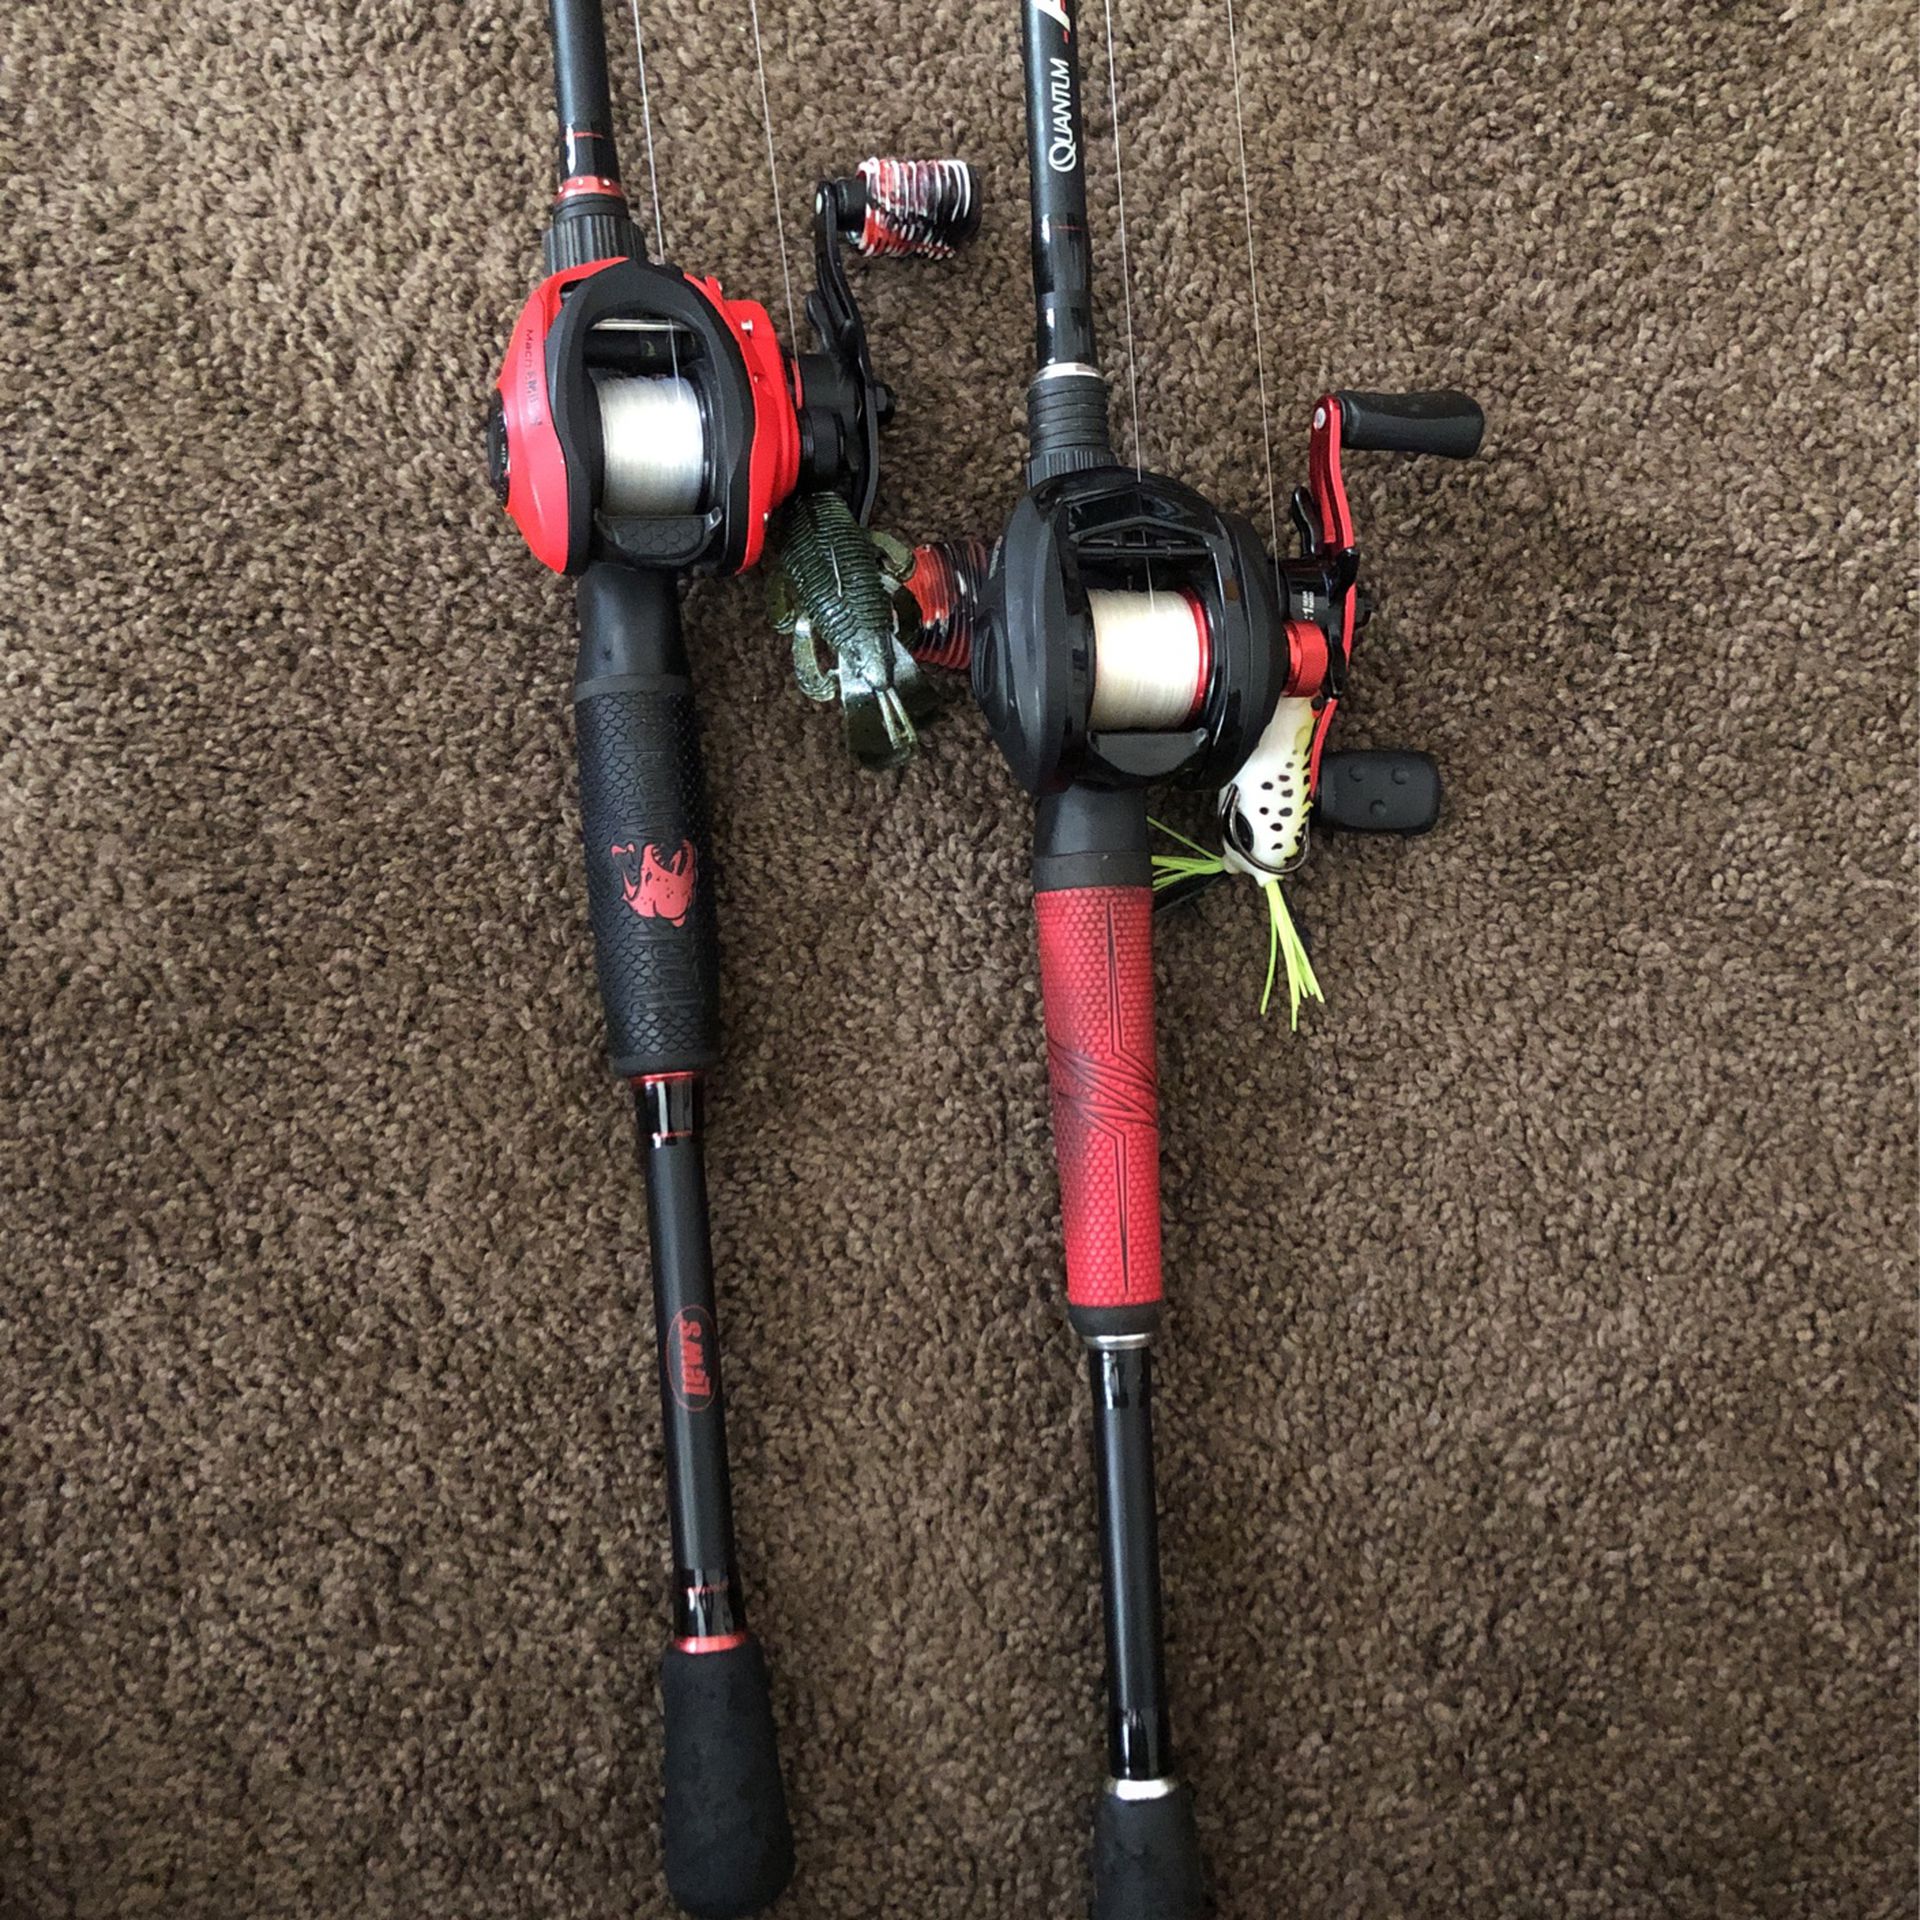 Baitcasting Reels And Rods